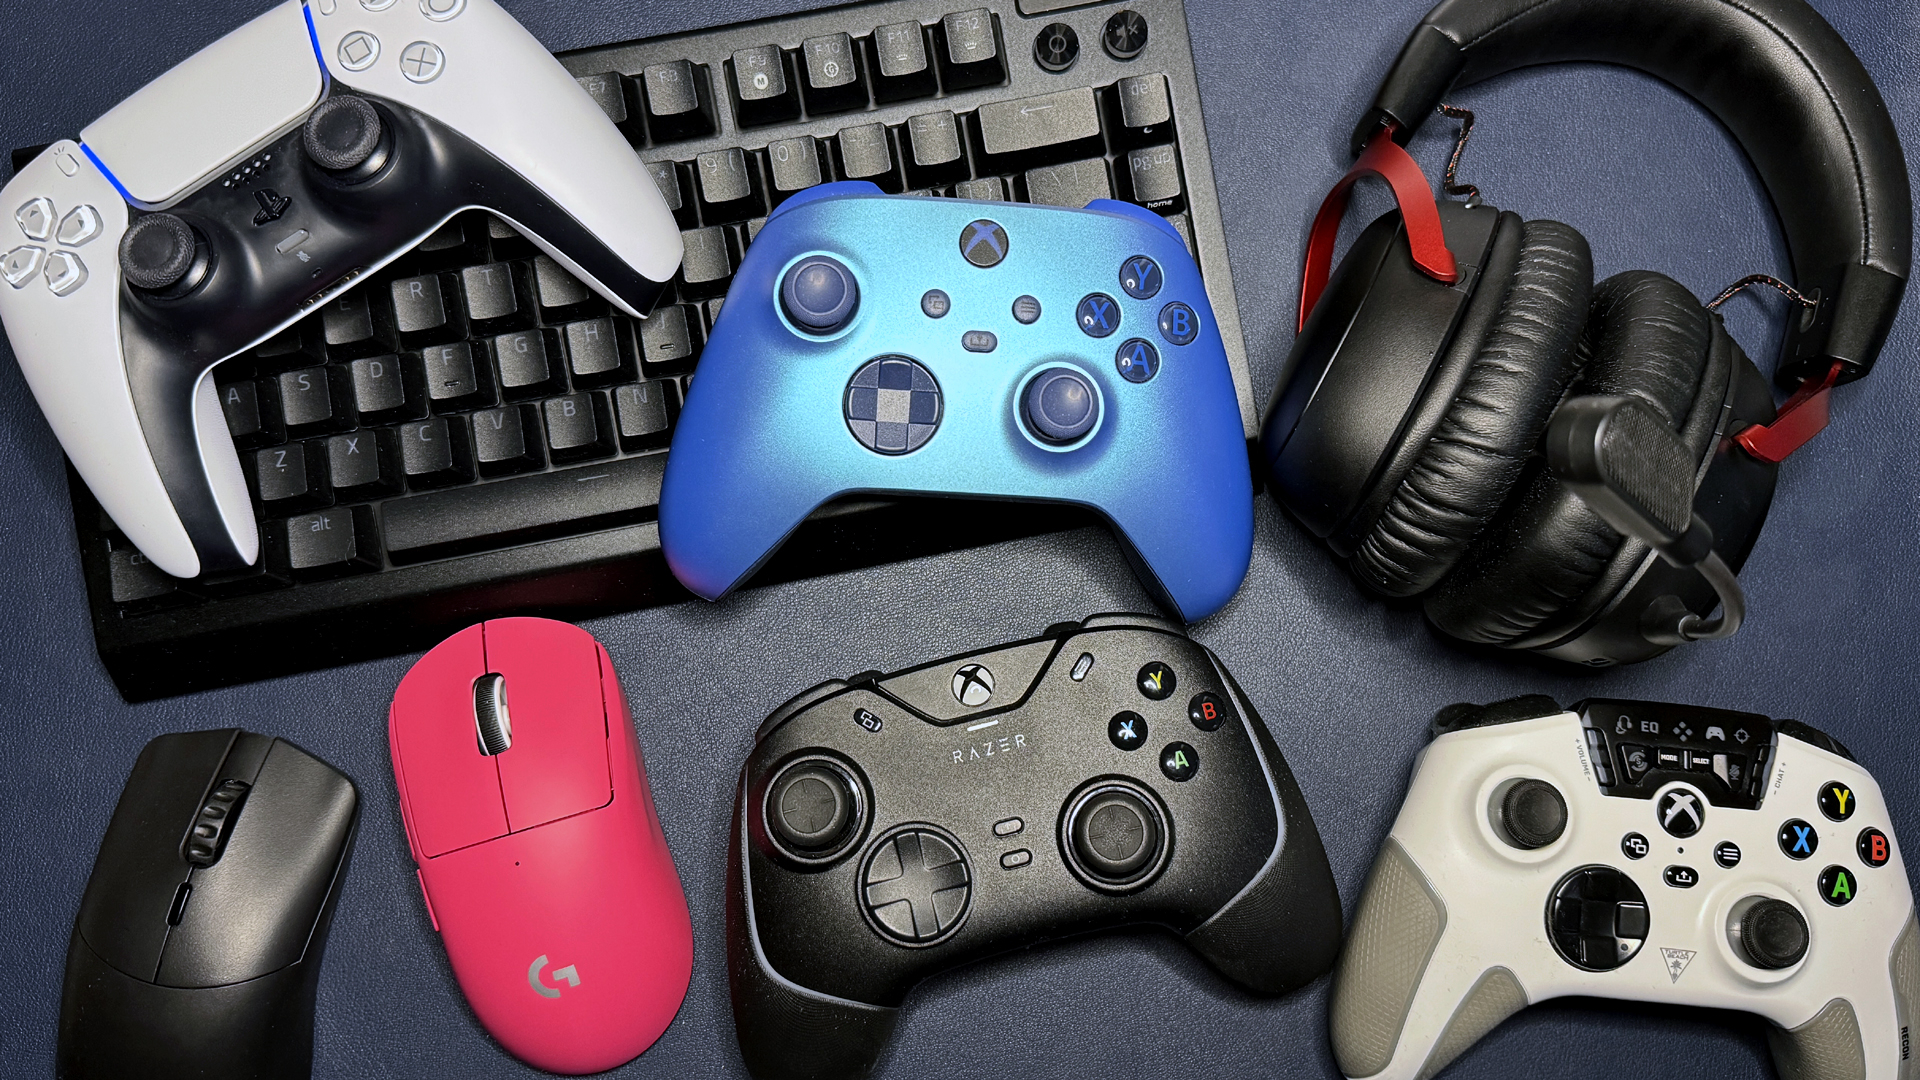 The gamer's guide to early Black Friday deals